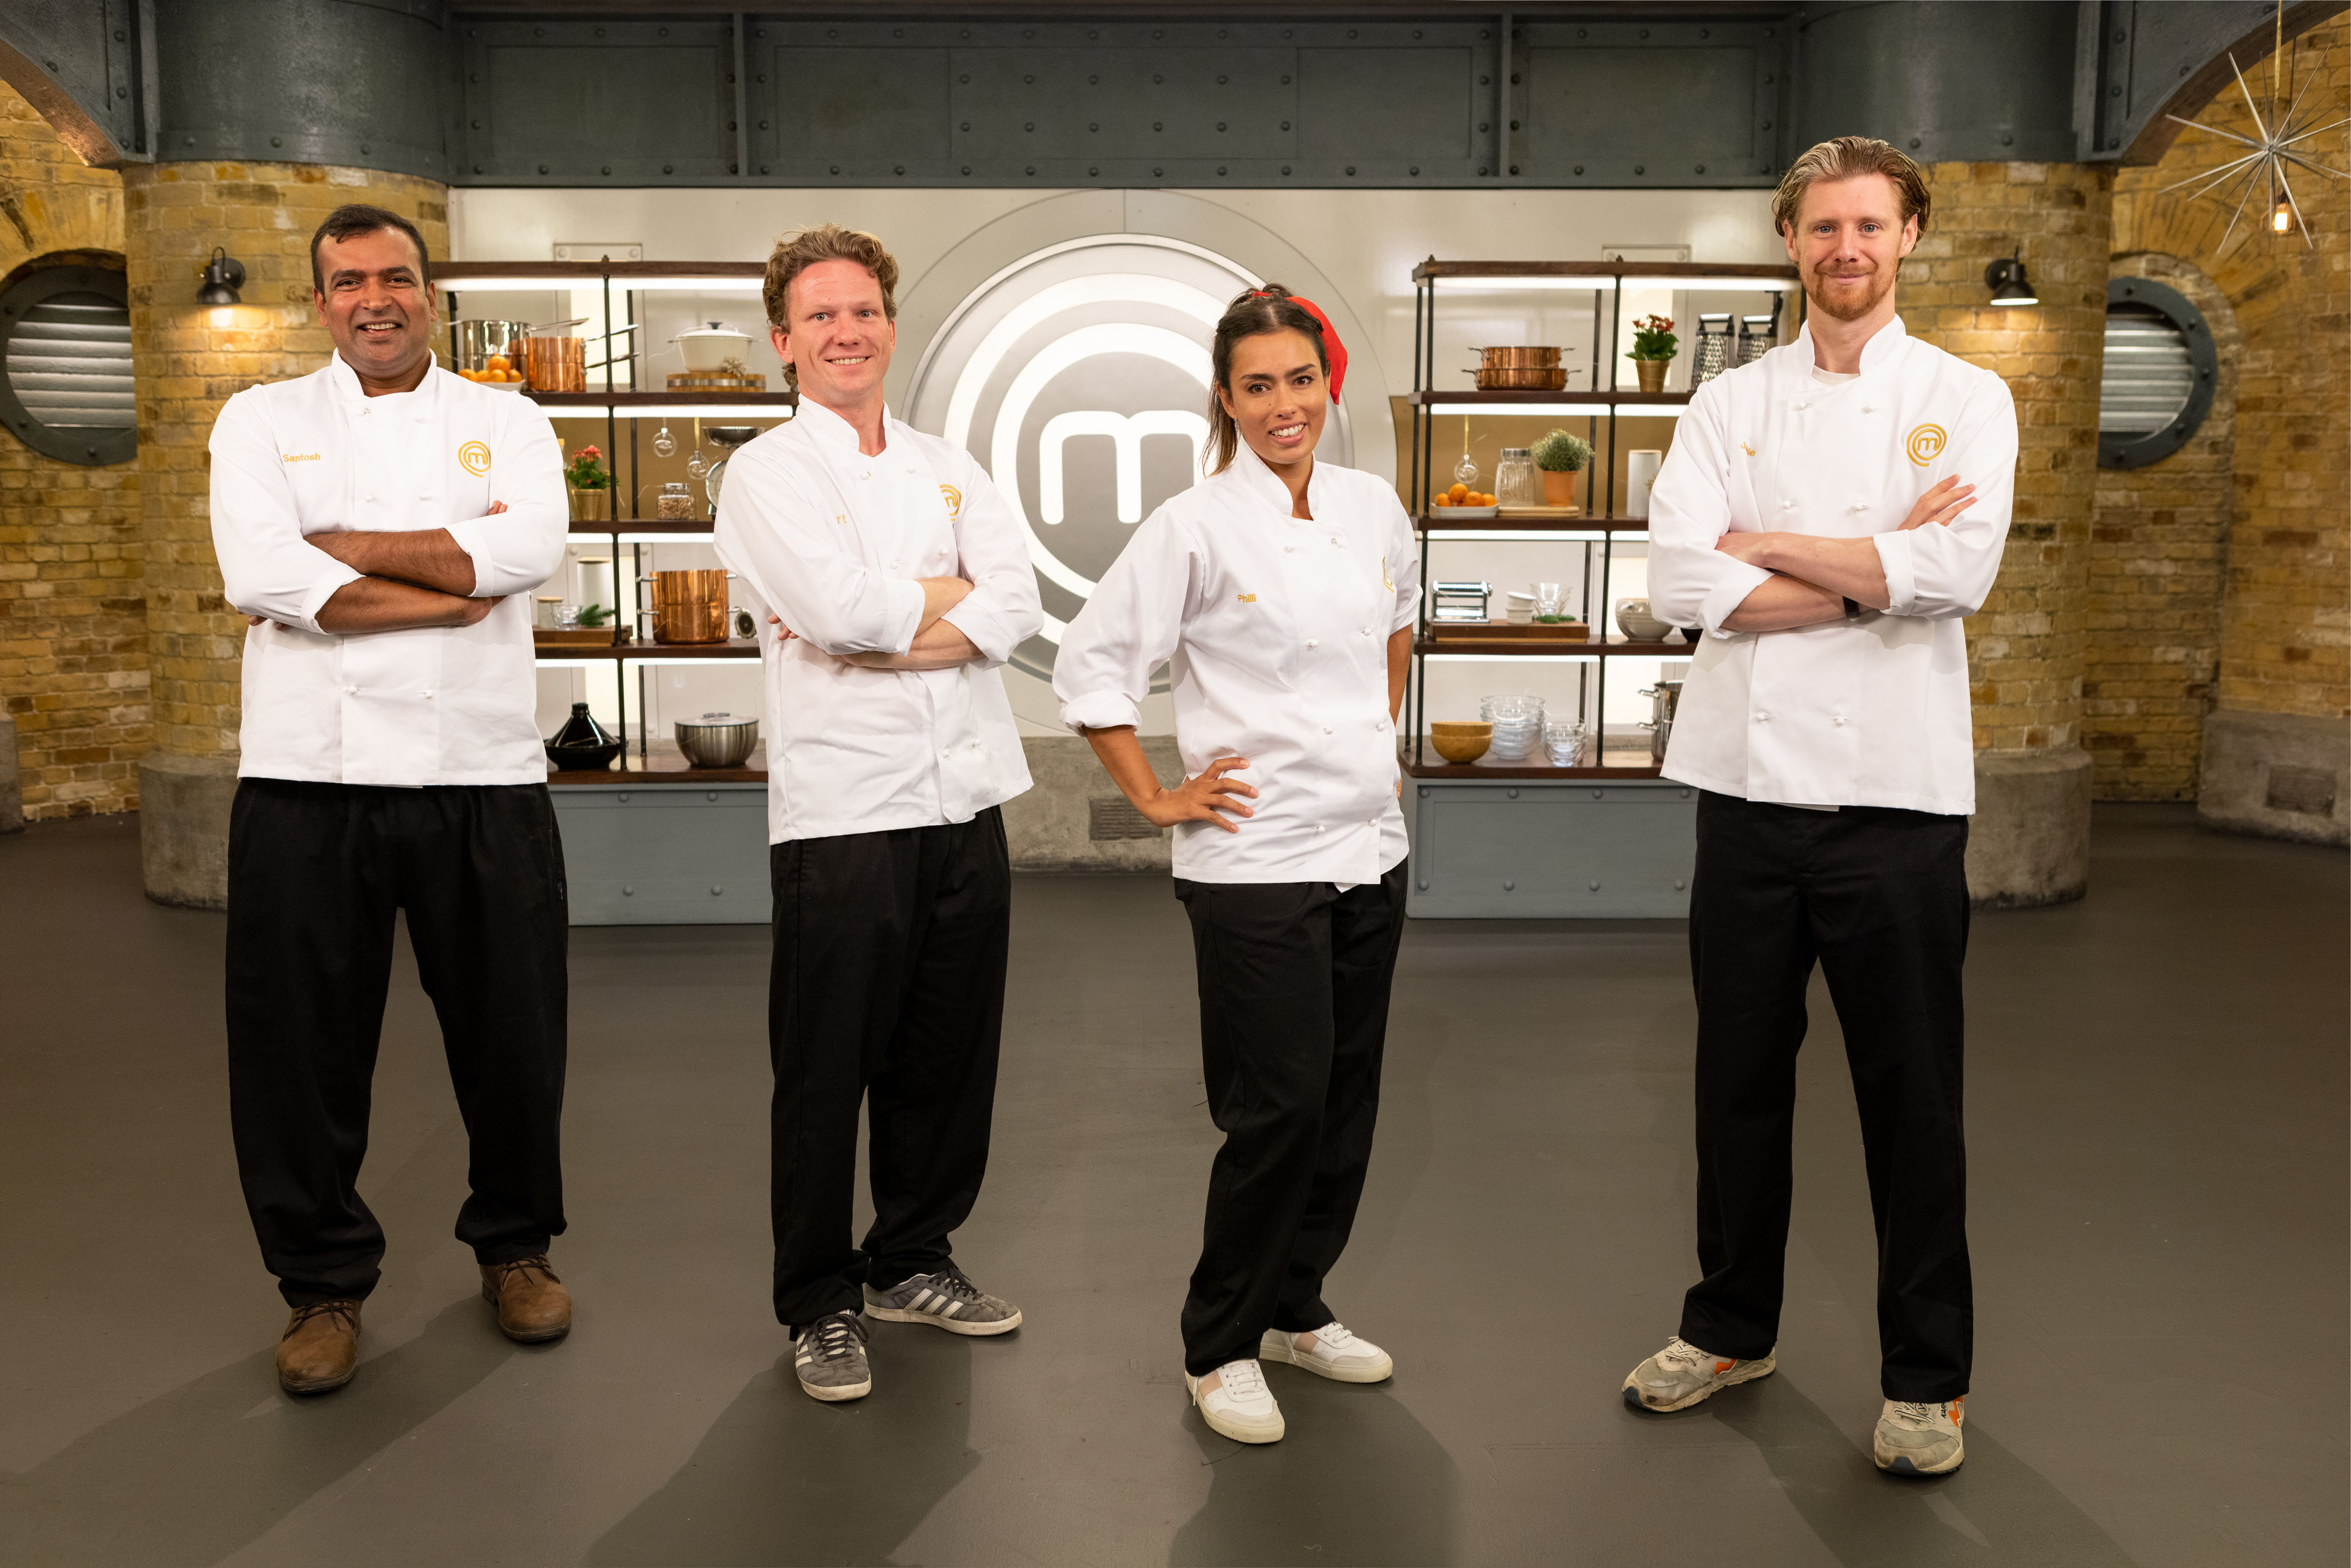 TV tonight Santosh, Bart, Philli and Jamie are back to cook